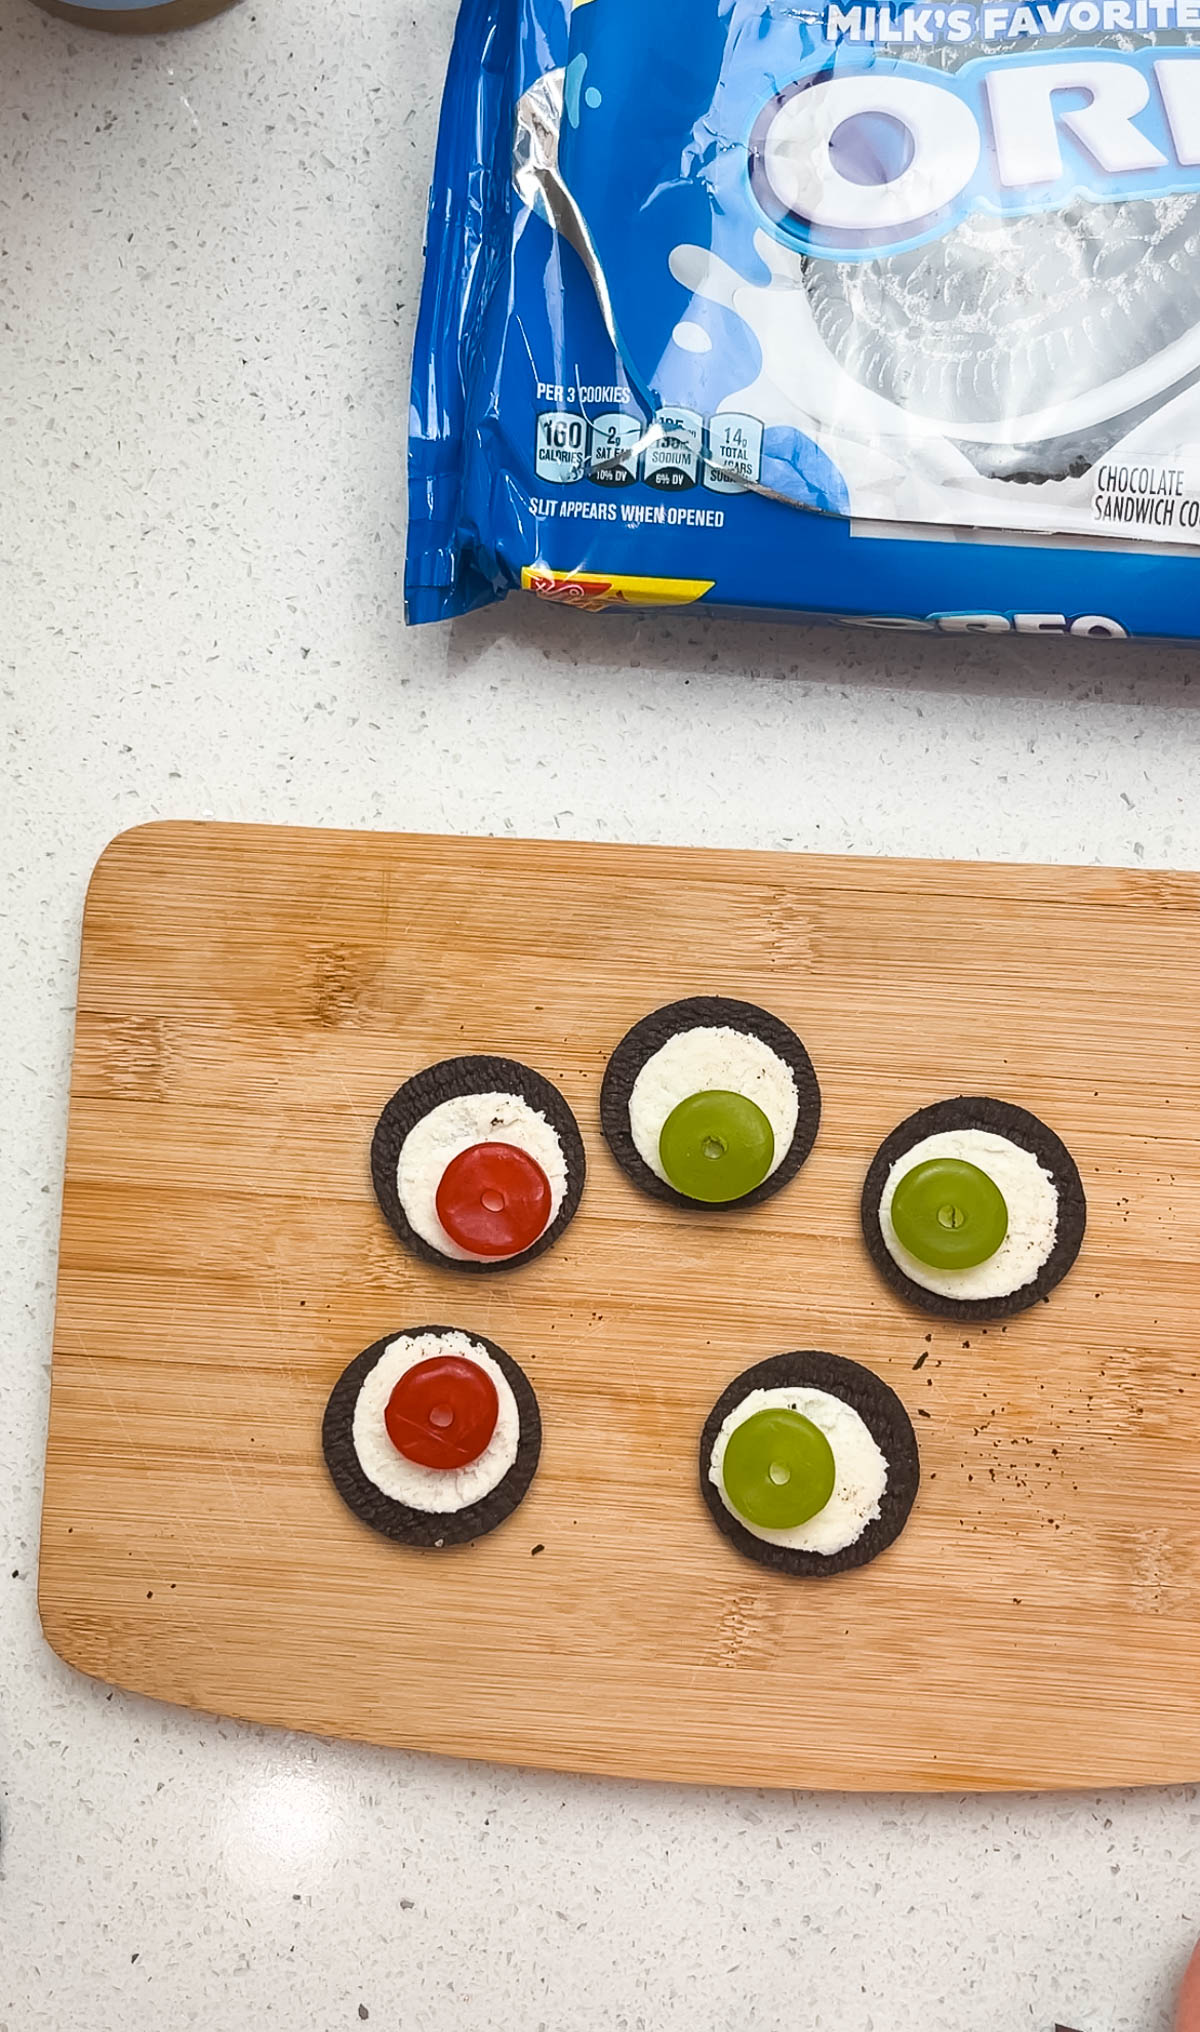 Oreo cookies with frosting showing and Lifesaver gummies on wood cutting board.